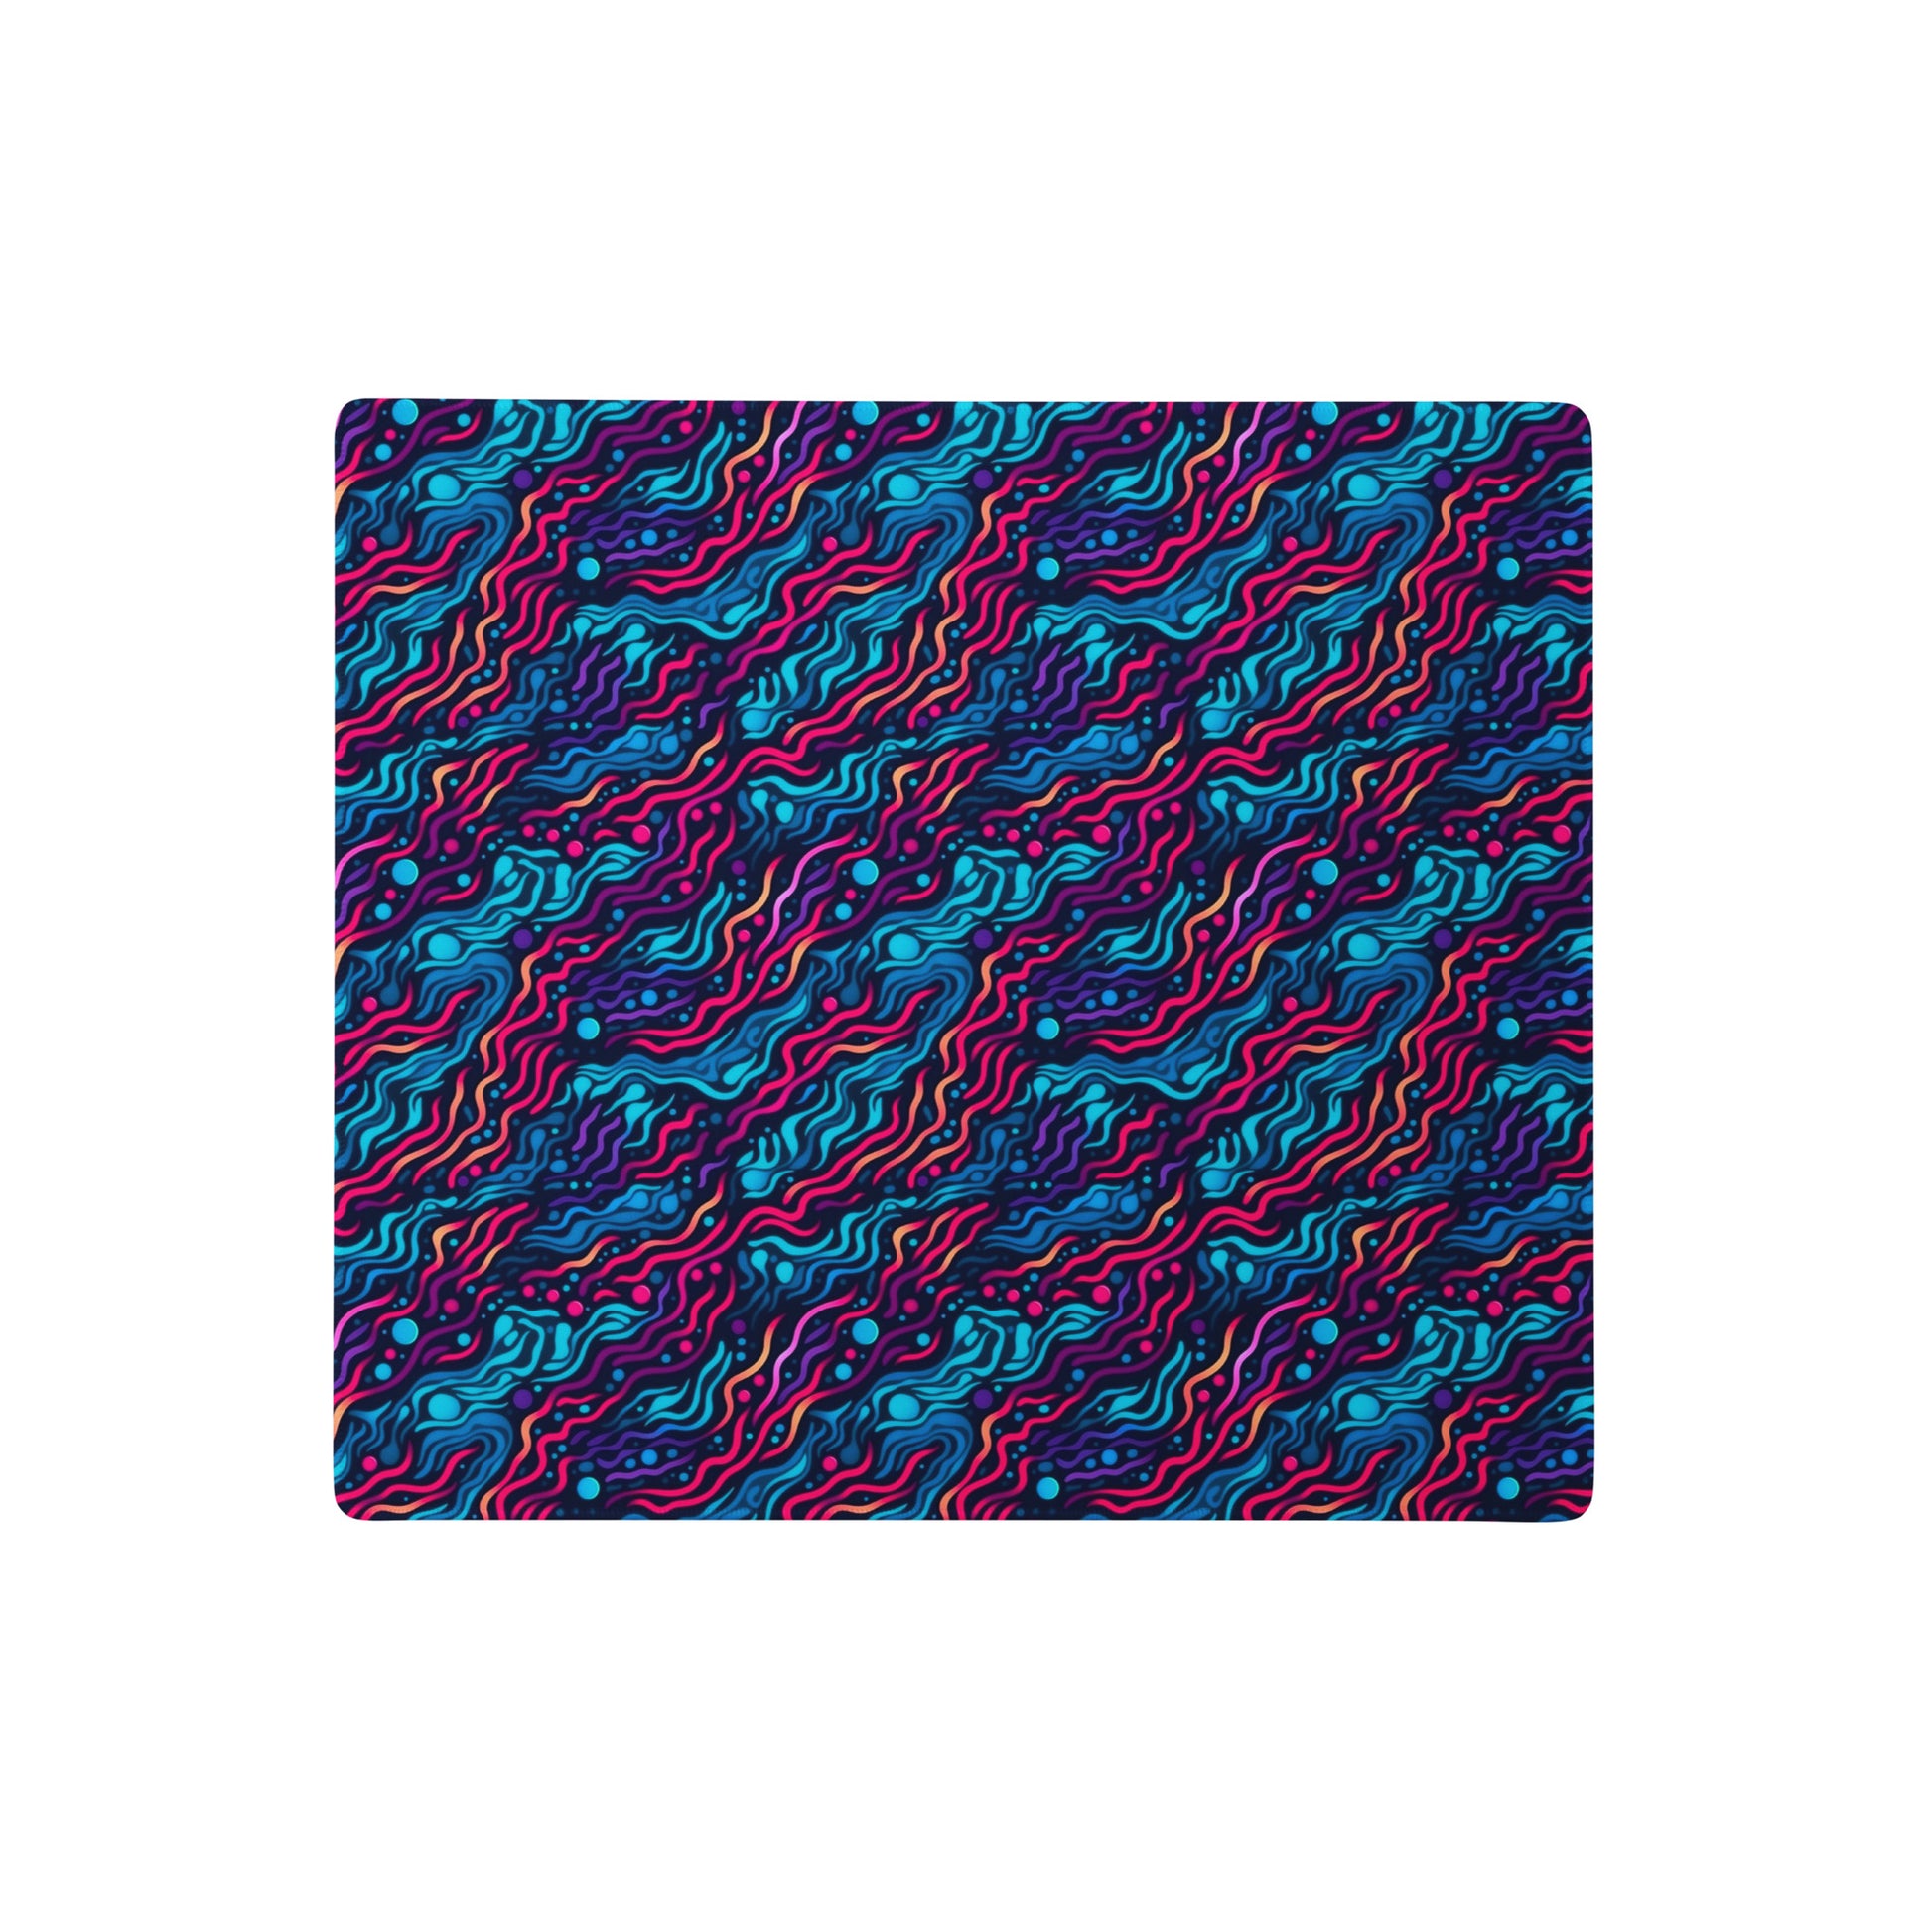 A 18" x 16" desk pad with wavy blue and pink pattern.